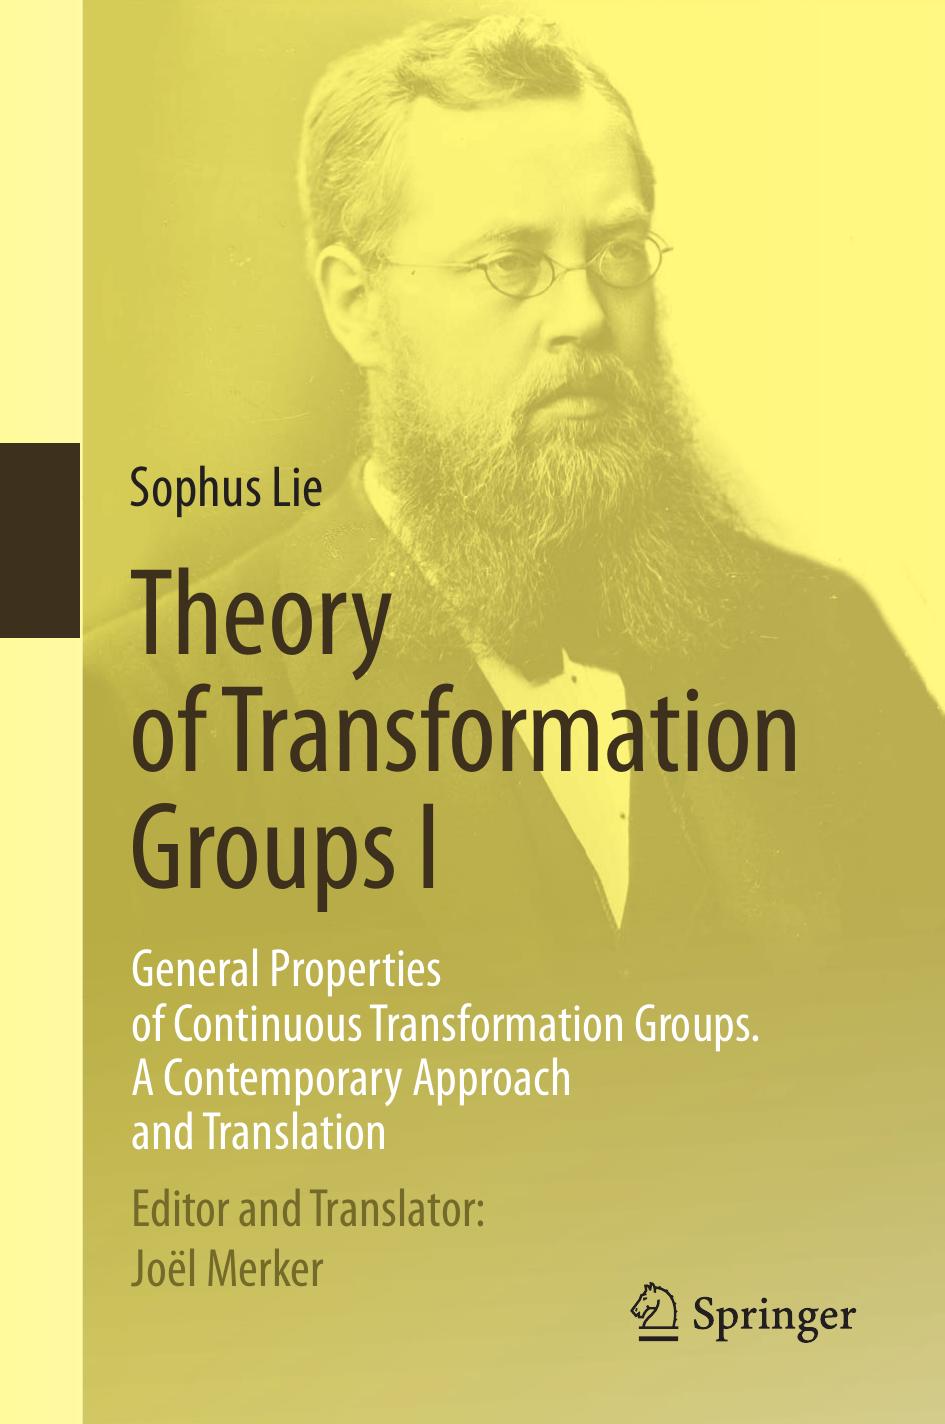 Theory of Transformation Groups I  General Properties of Continuous Transformation Groups. A Contemporary (2015)